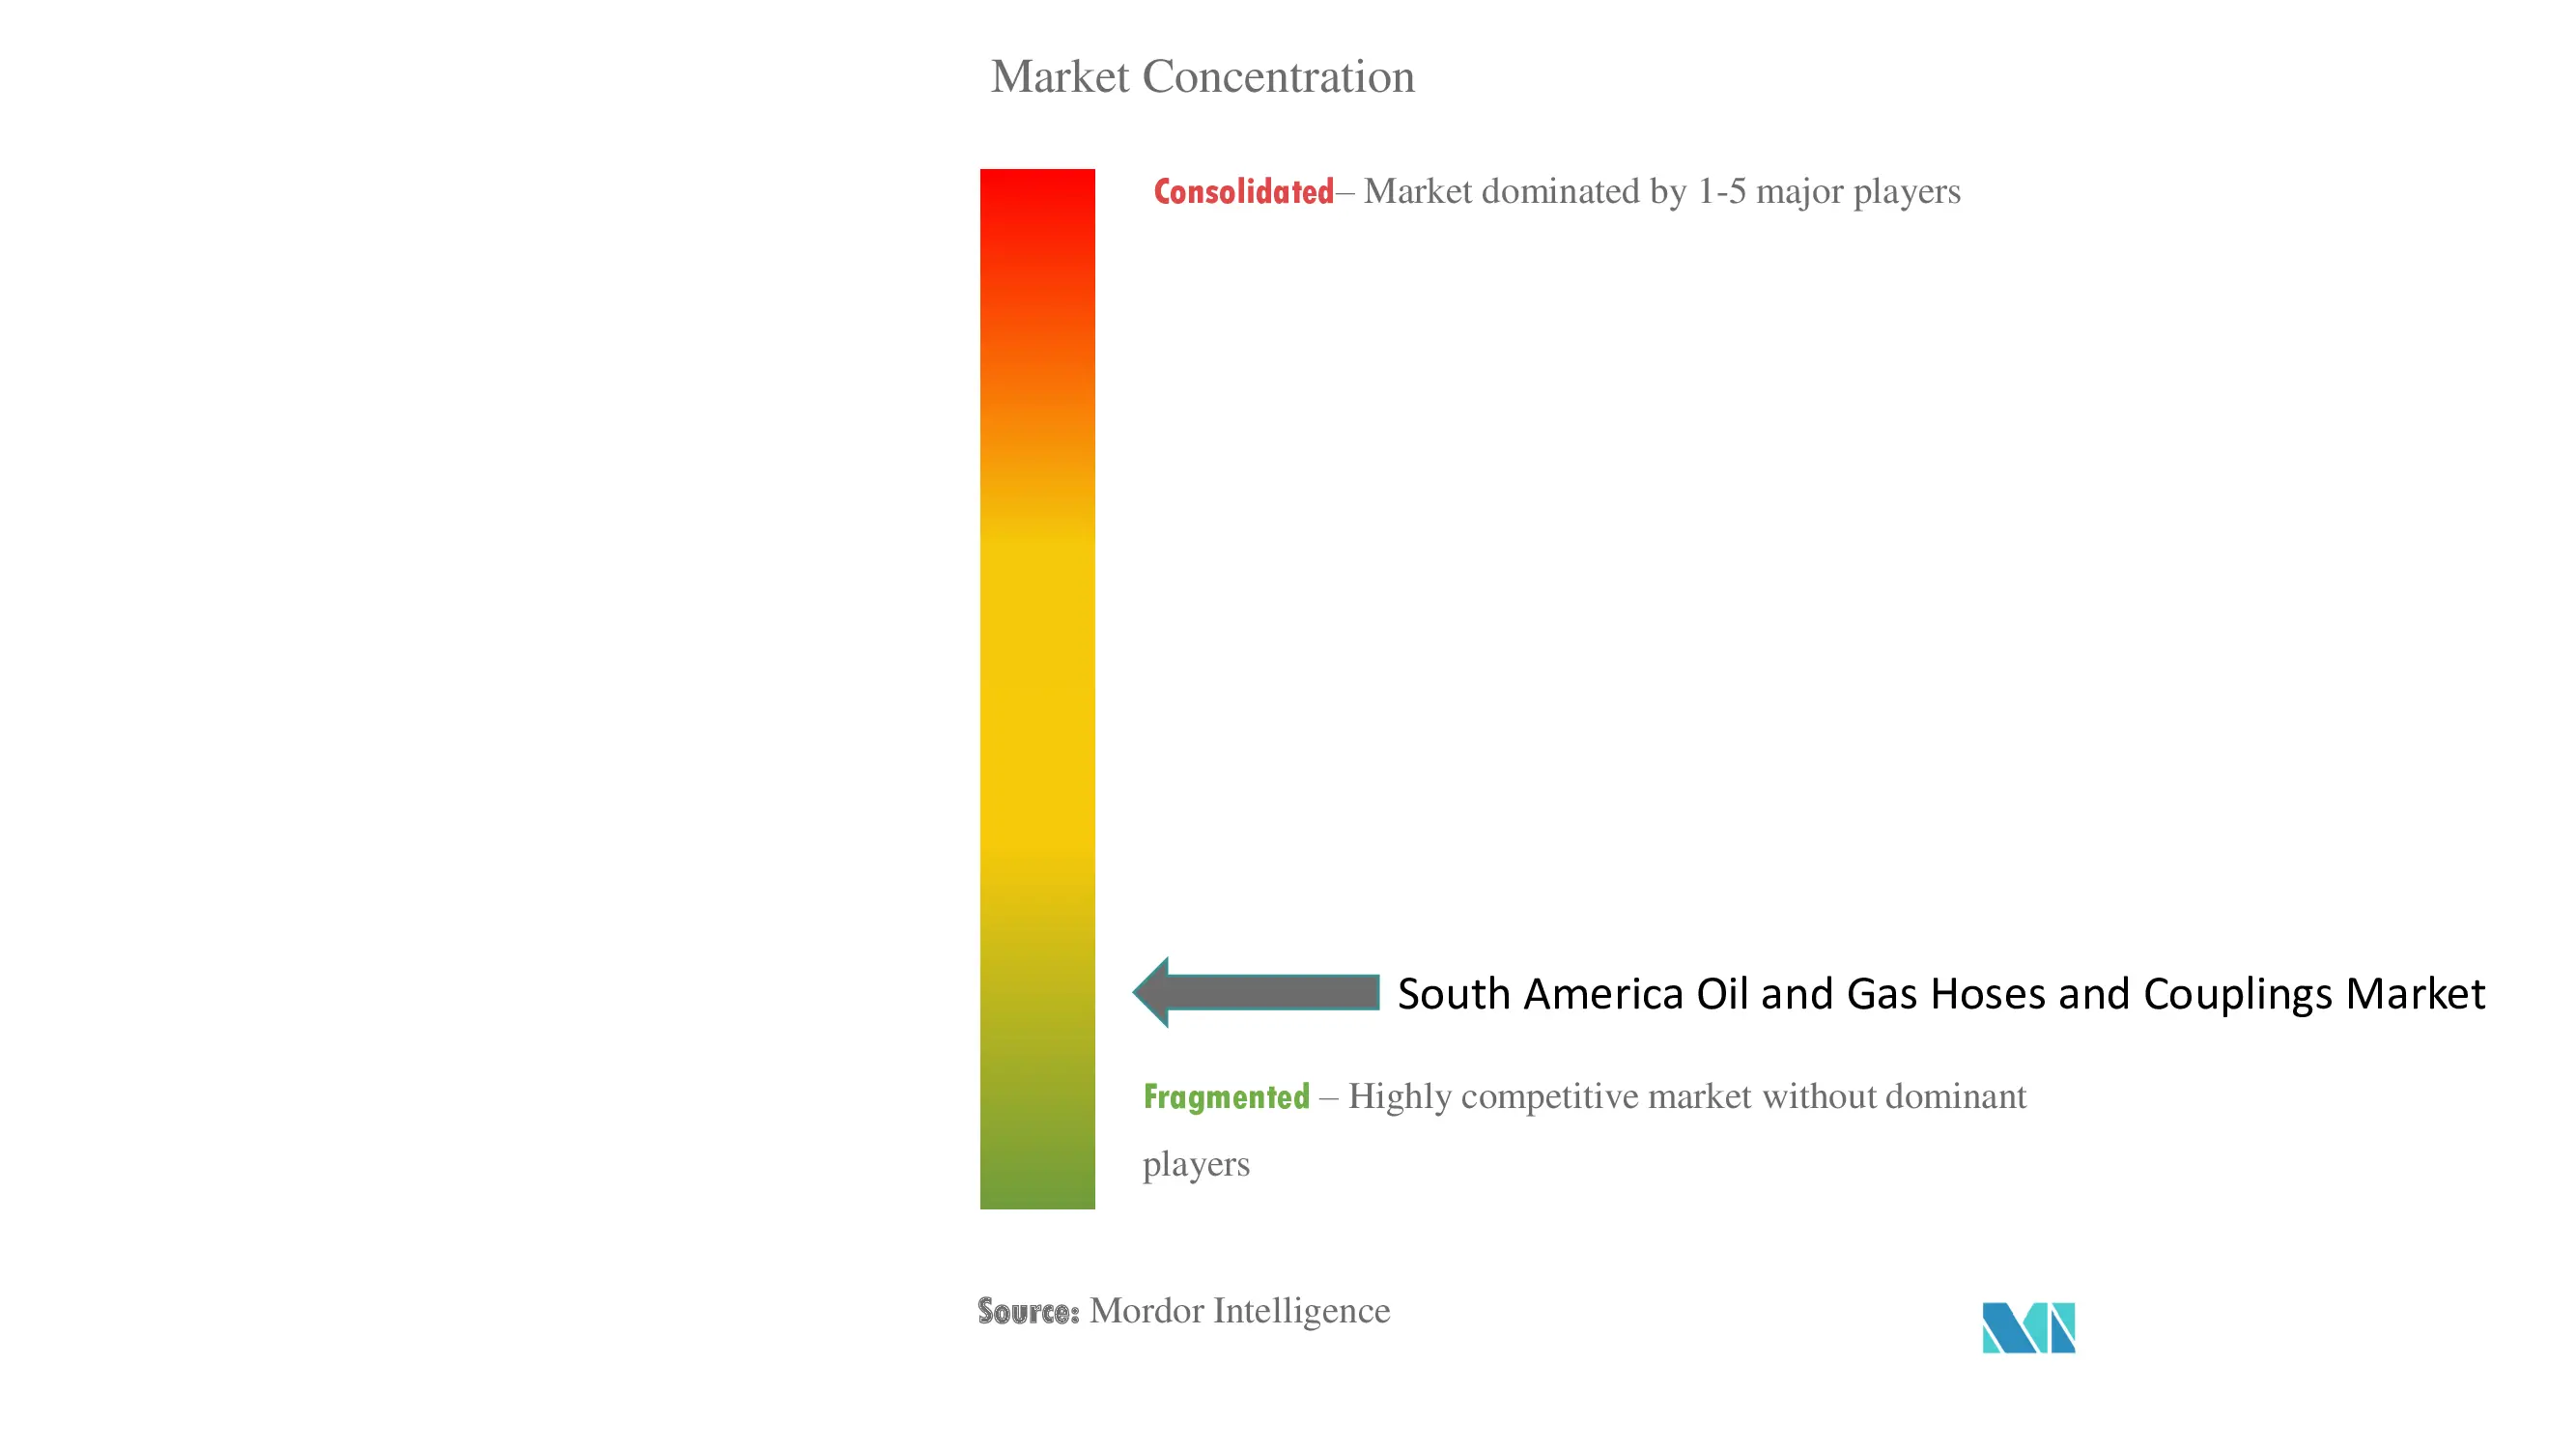 South America Oil And Gas Hoses And Coupling Market Concentration